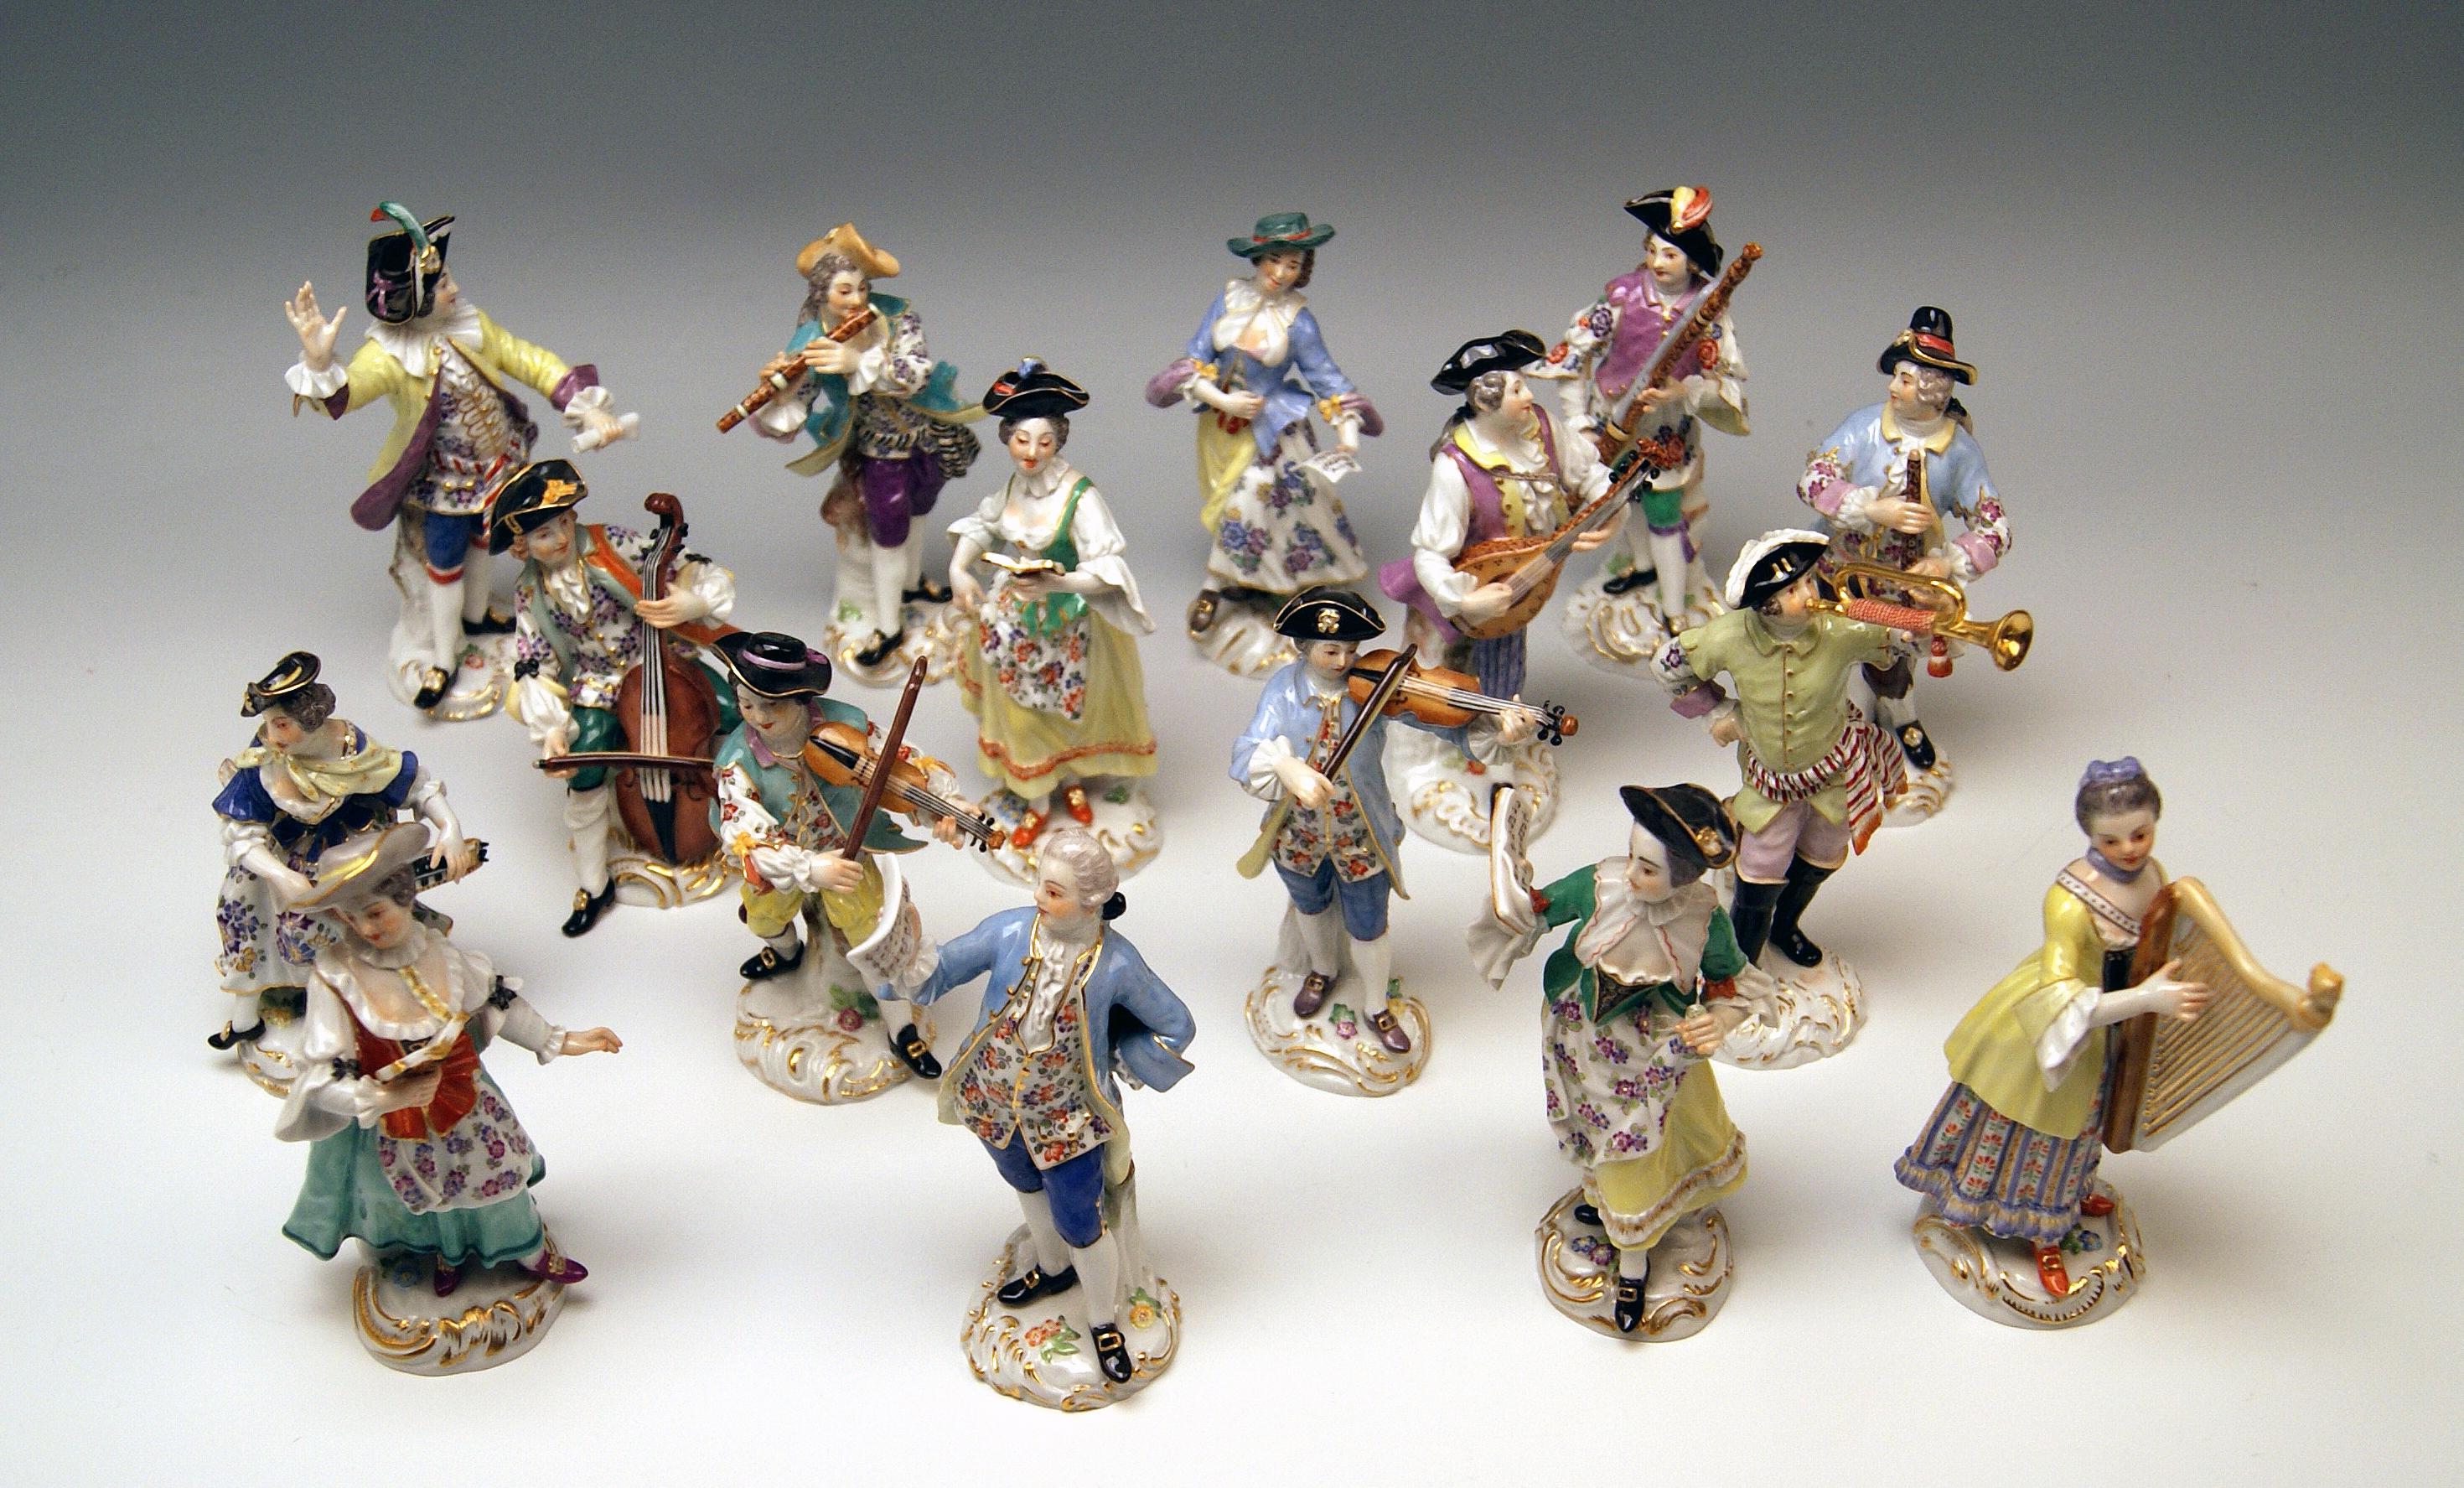 Meissen gorgeous group of figurines 'GALLANT ORCHESTRA', once created by Johann Joachim Kaendler (1706-1775) and Friedrich Elias Meyer (1723-1785): 16 figurines

Size:
Average height of figurines: circa 13.5 - 16.0 cm / 5.31 - 6.29